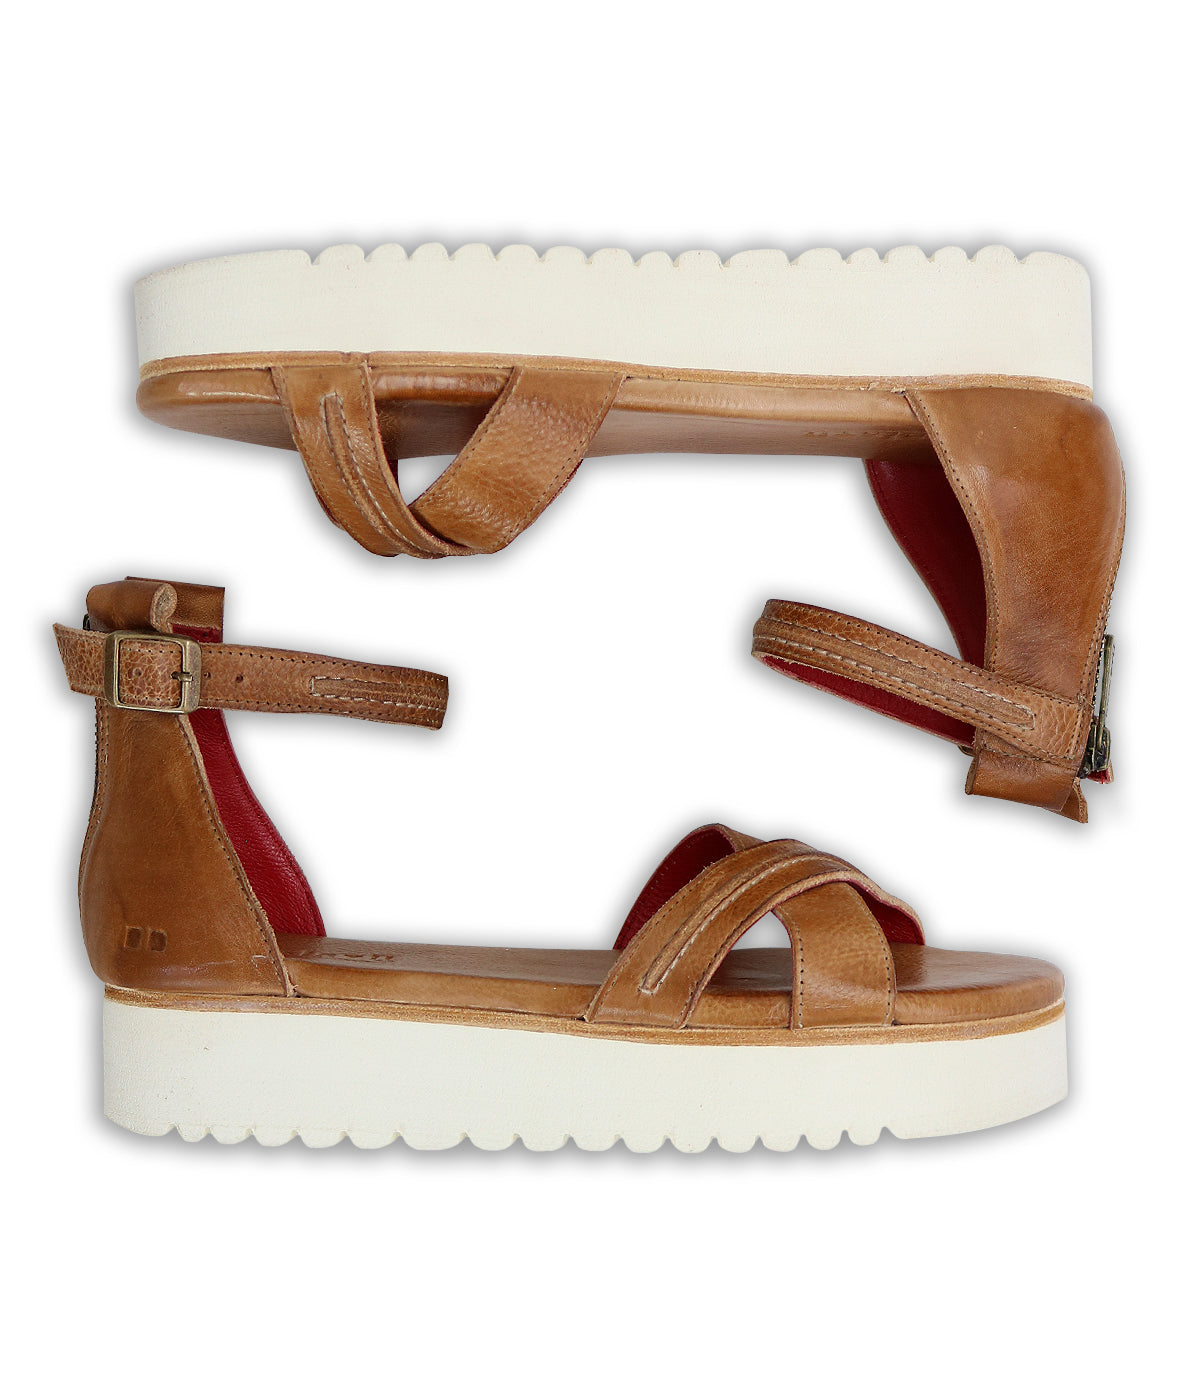 A pair of Carroll sandals by Bed Stu with red soles.